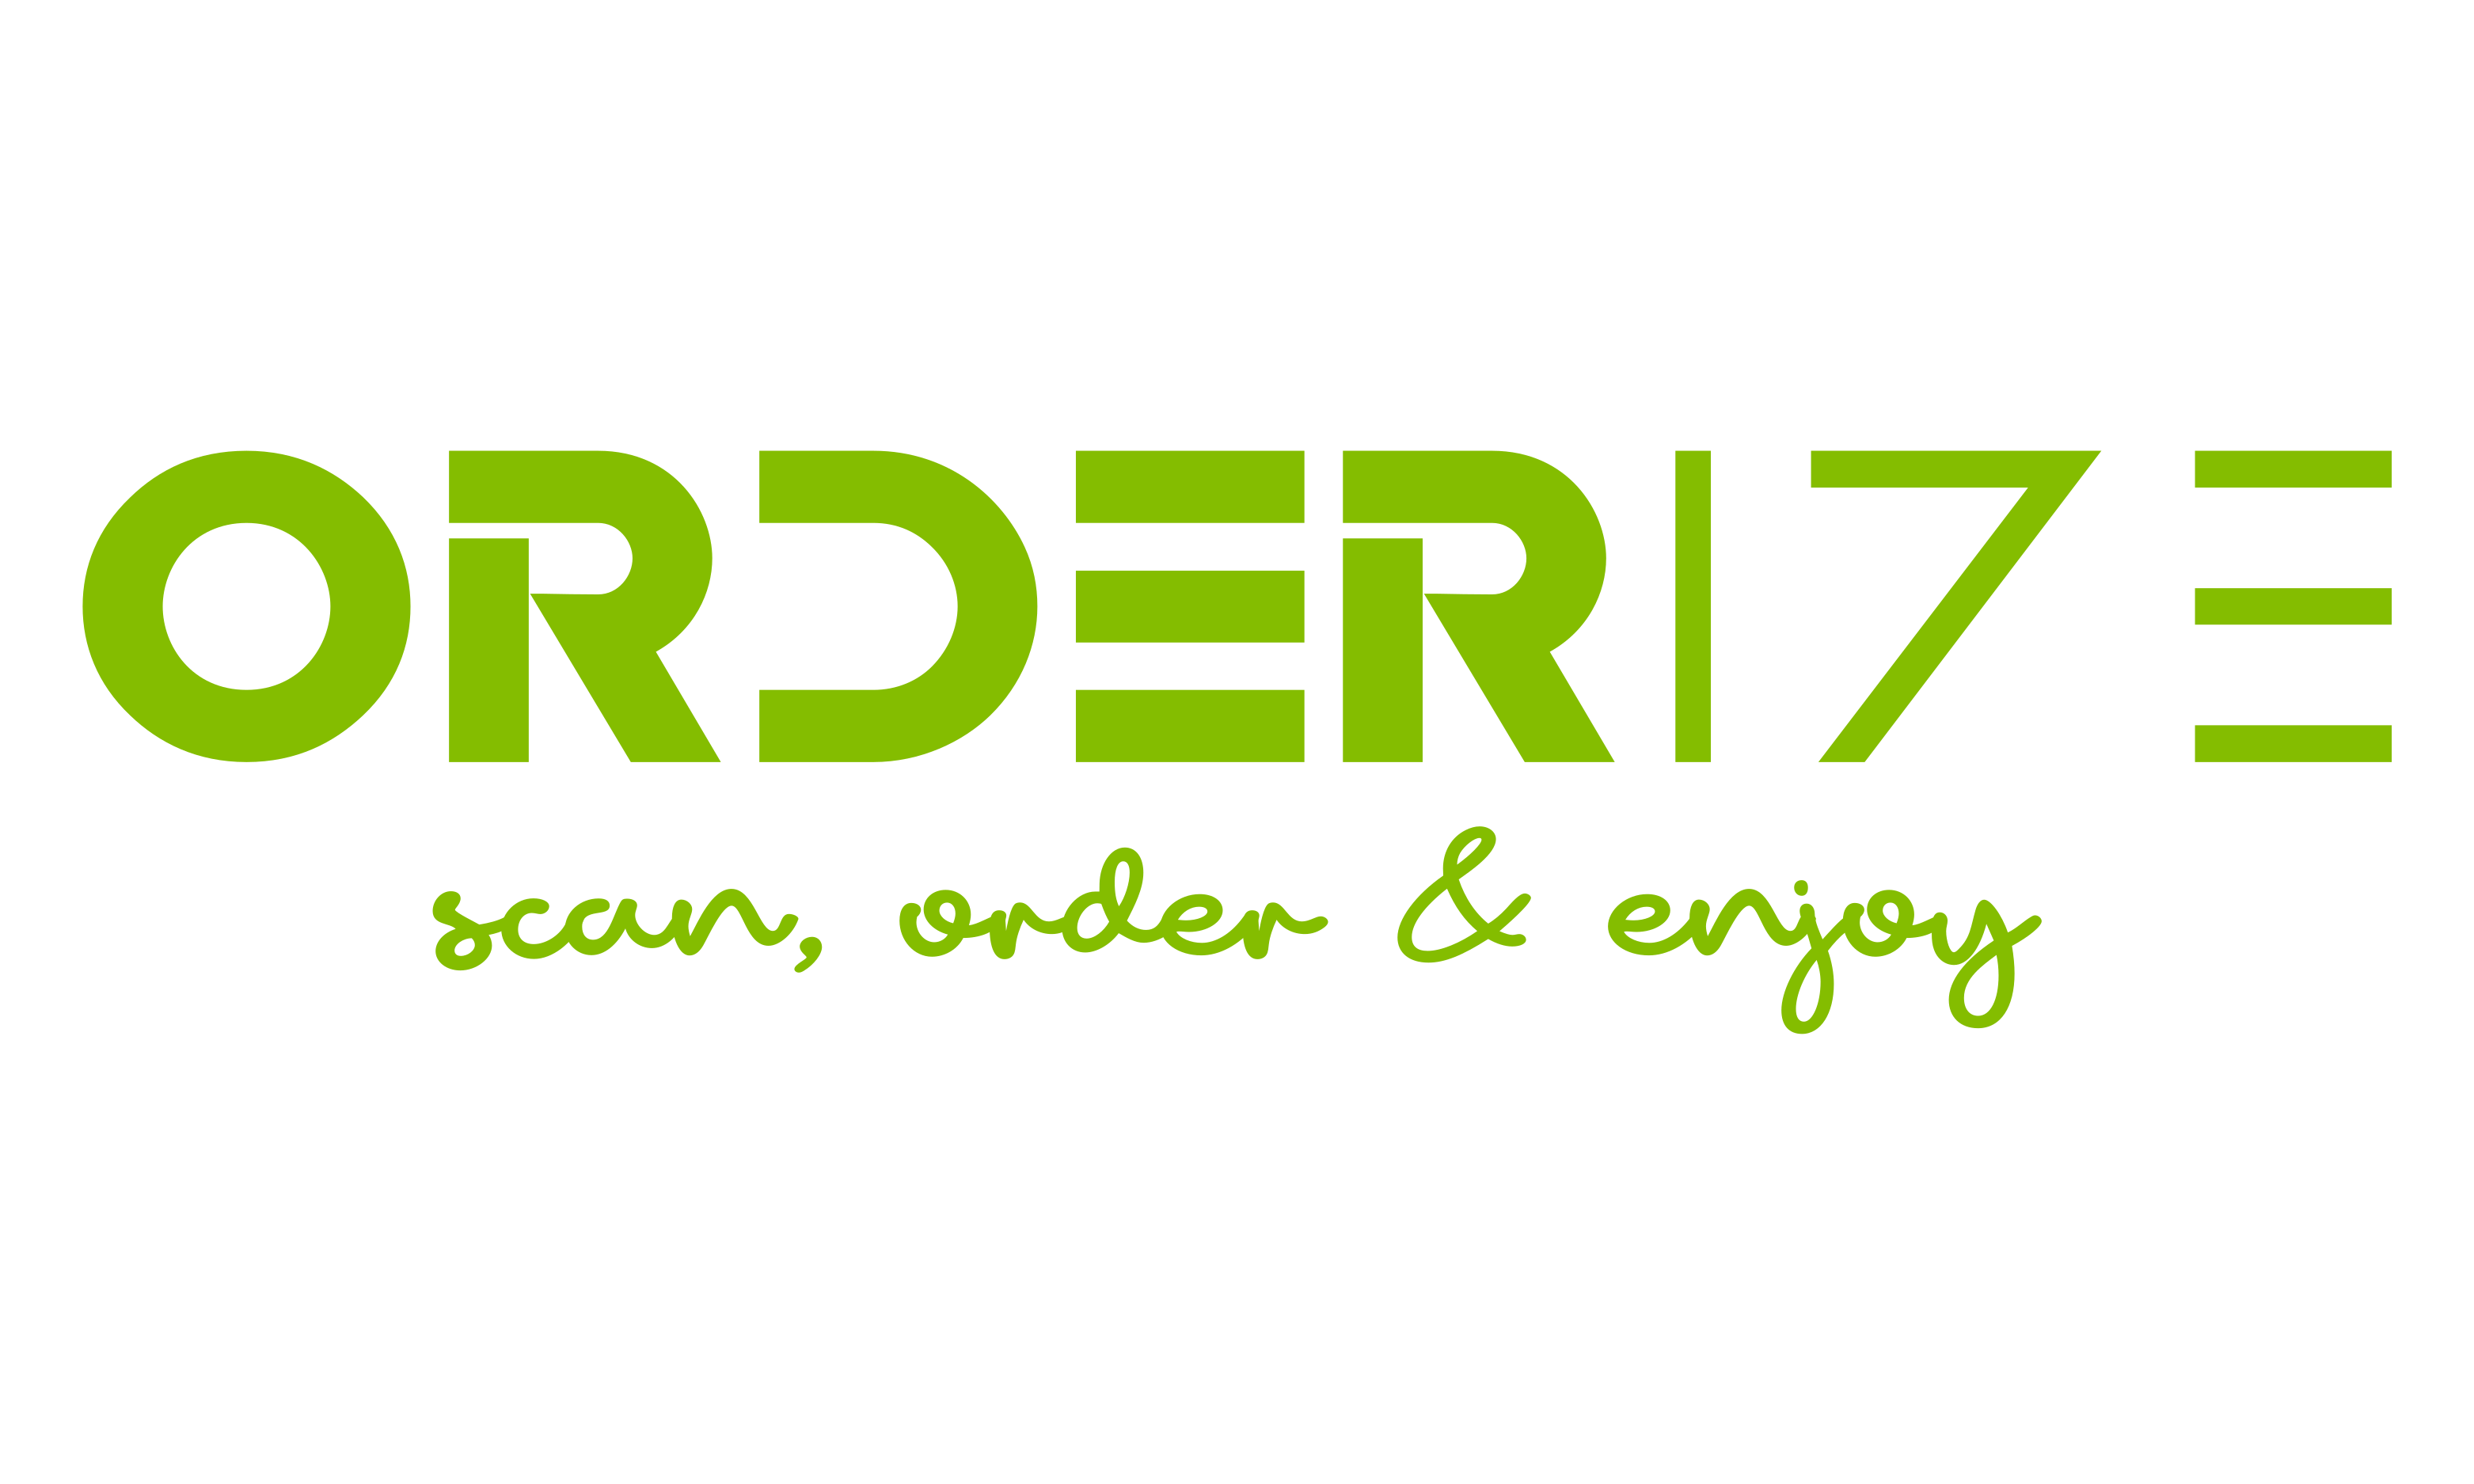 Orderize startup